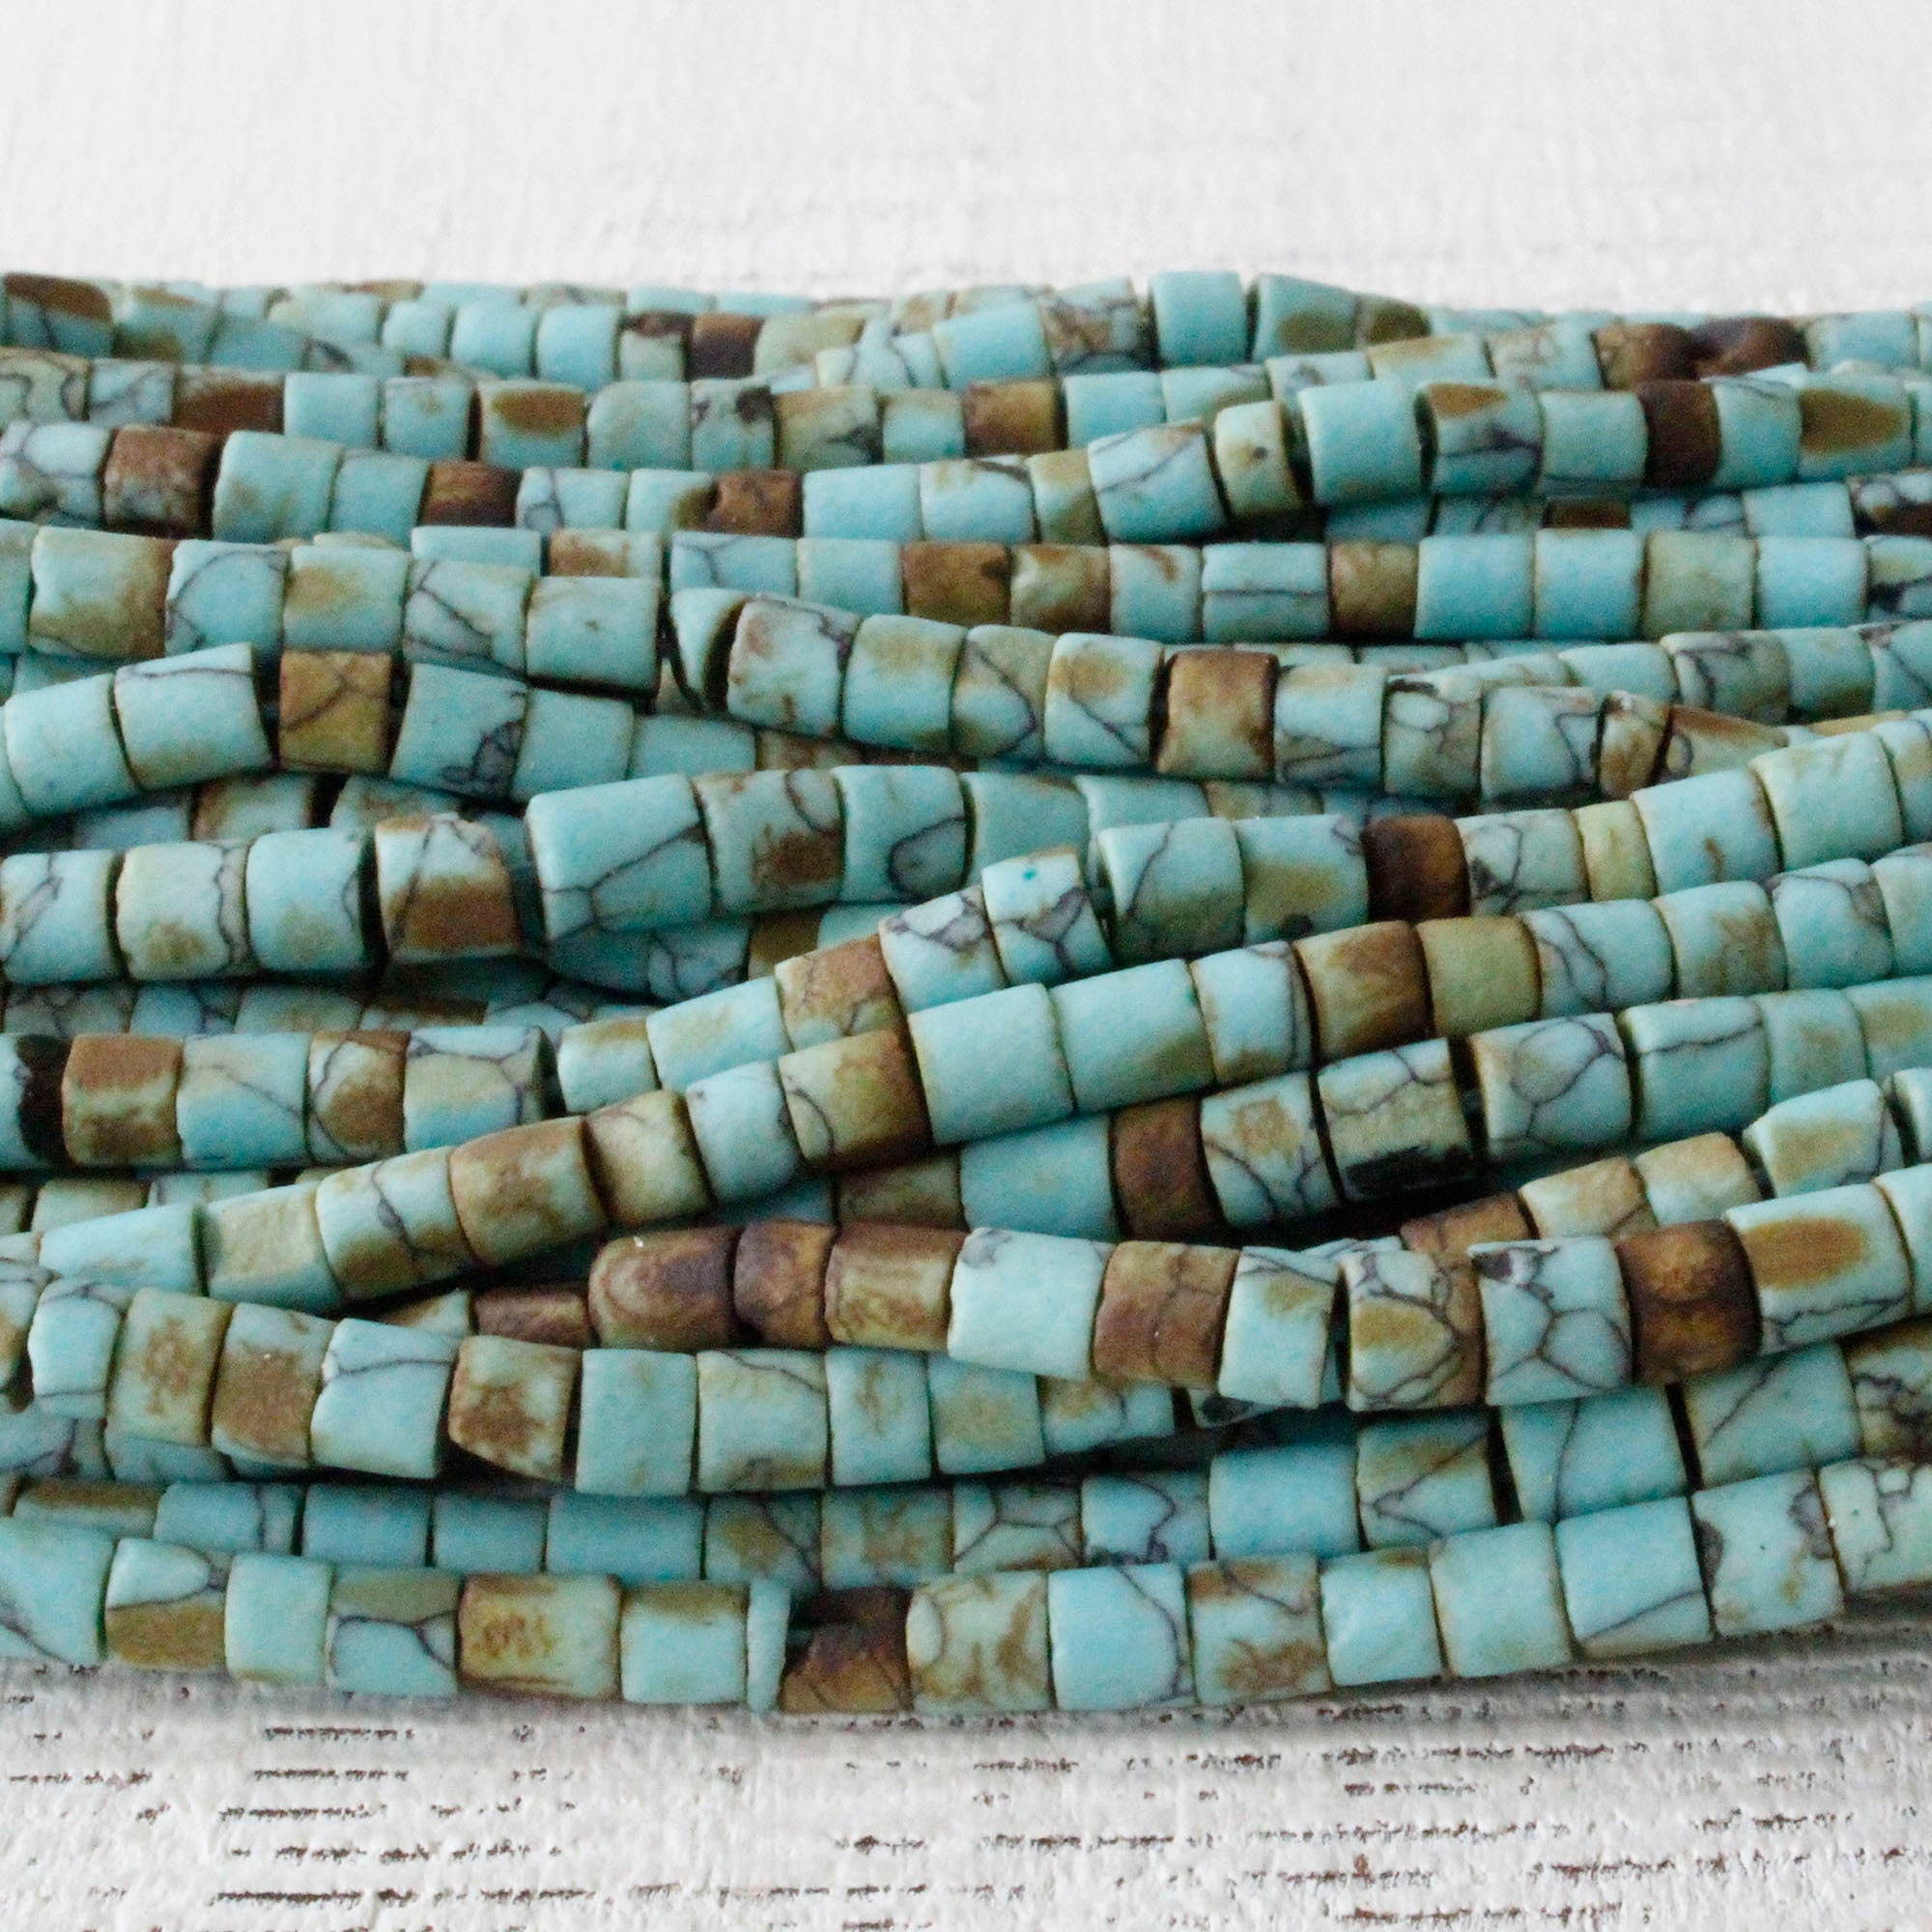 3x4mm Turquoise Tube Beads Natural Turquoise Beads for Jewelry Making 3x4mm  Gemstone Beads 13 Inches 